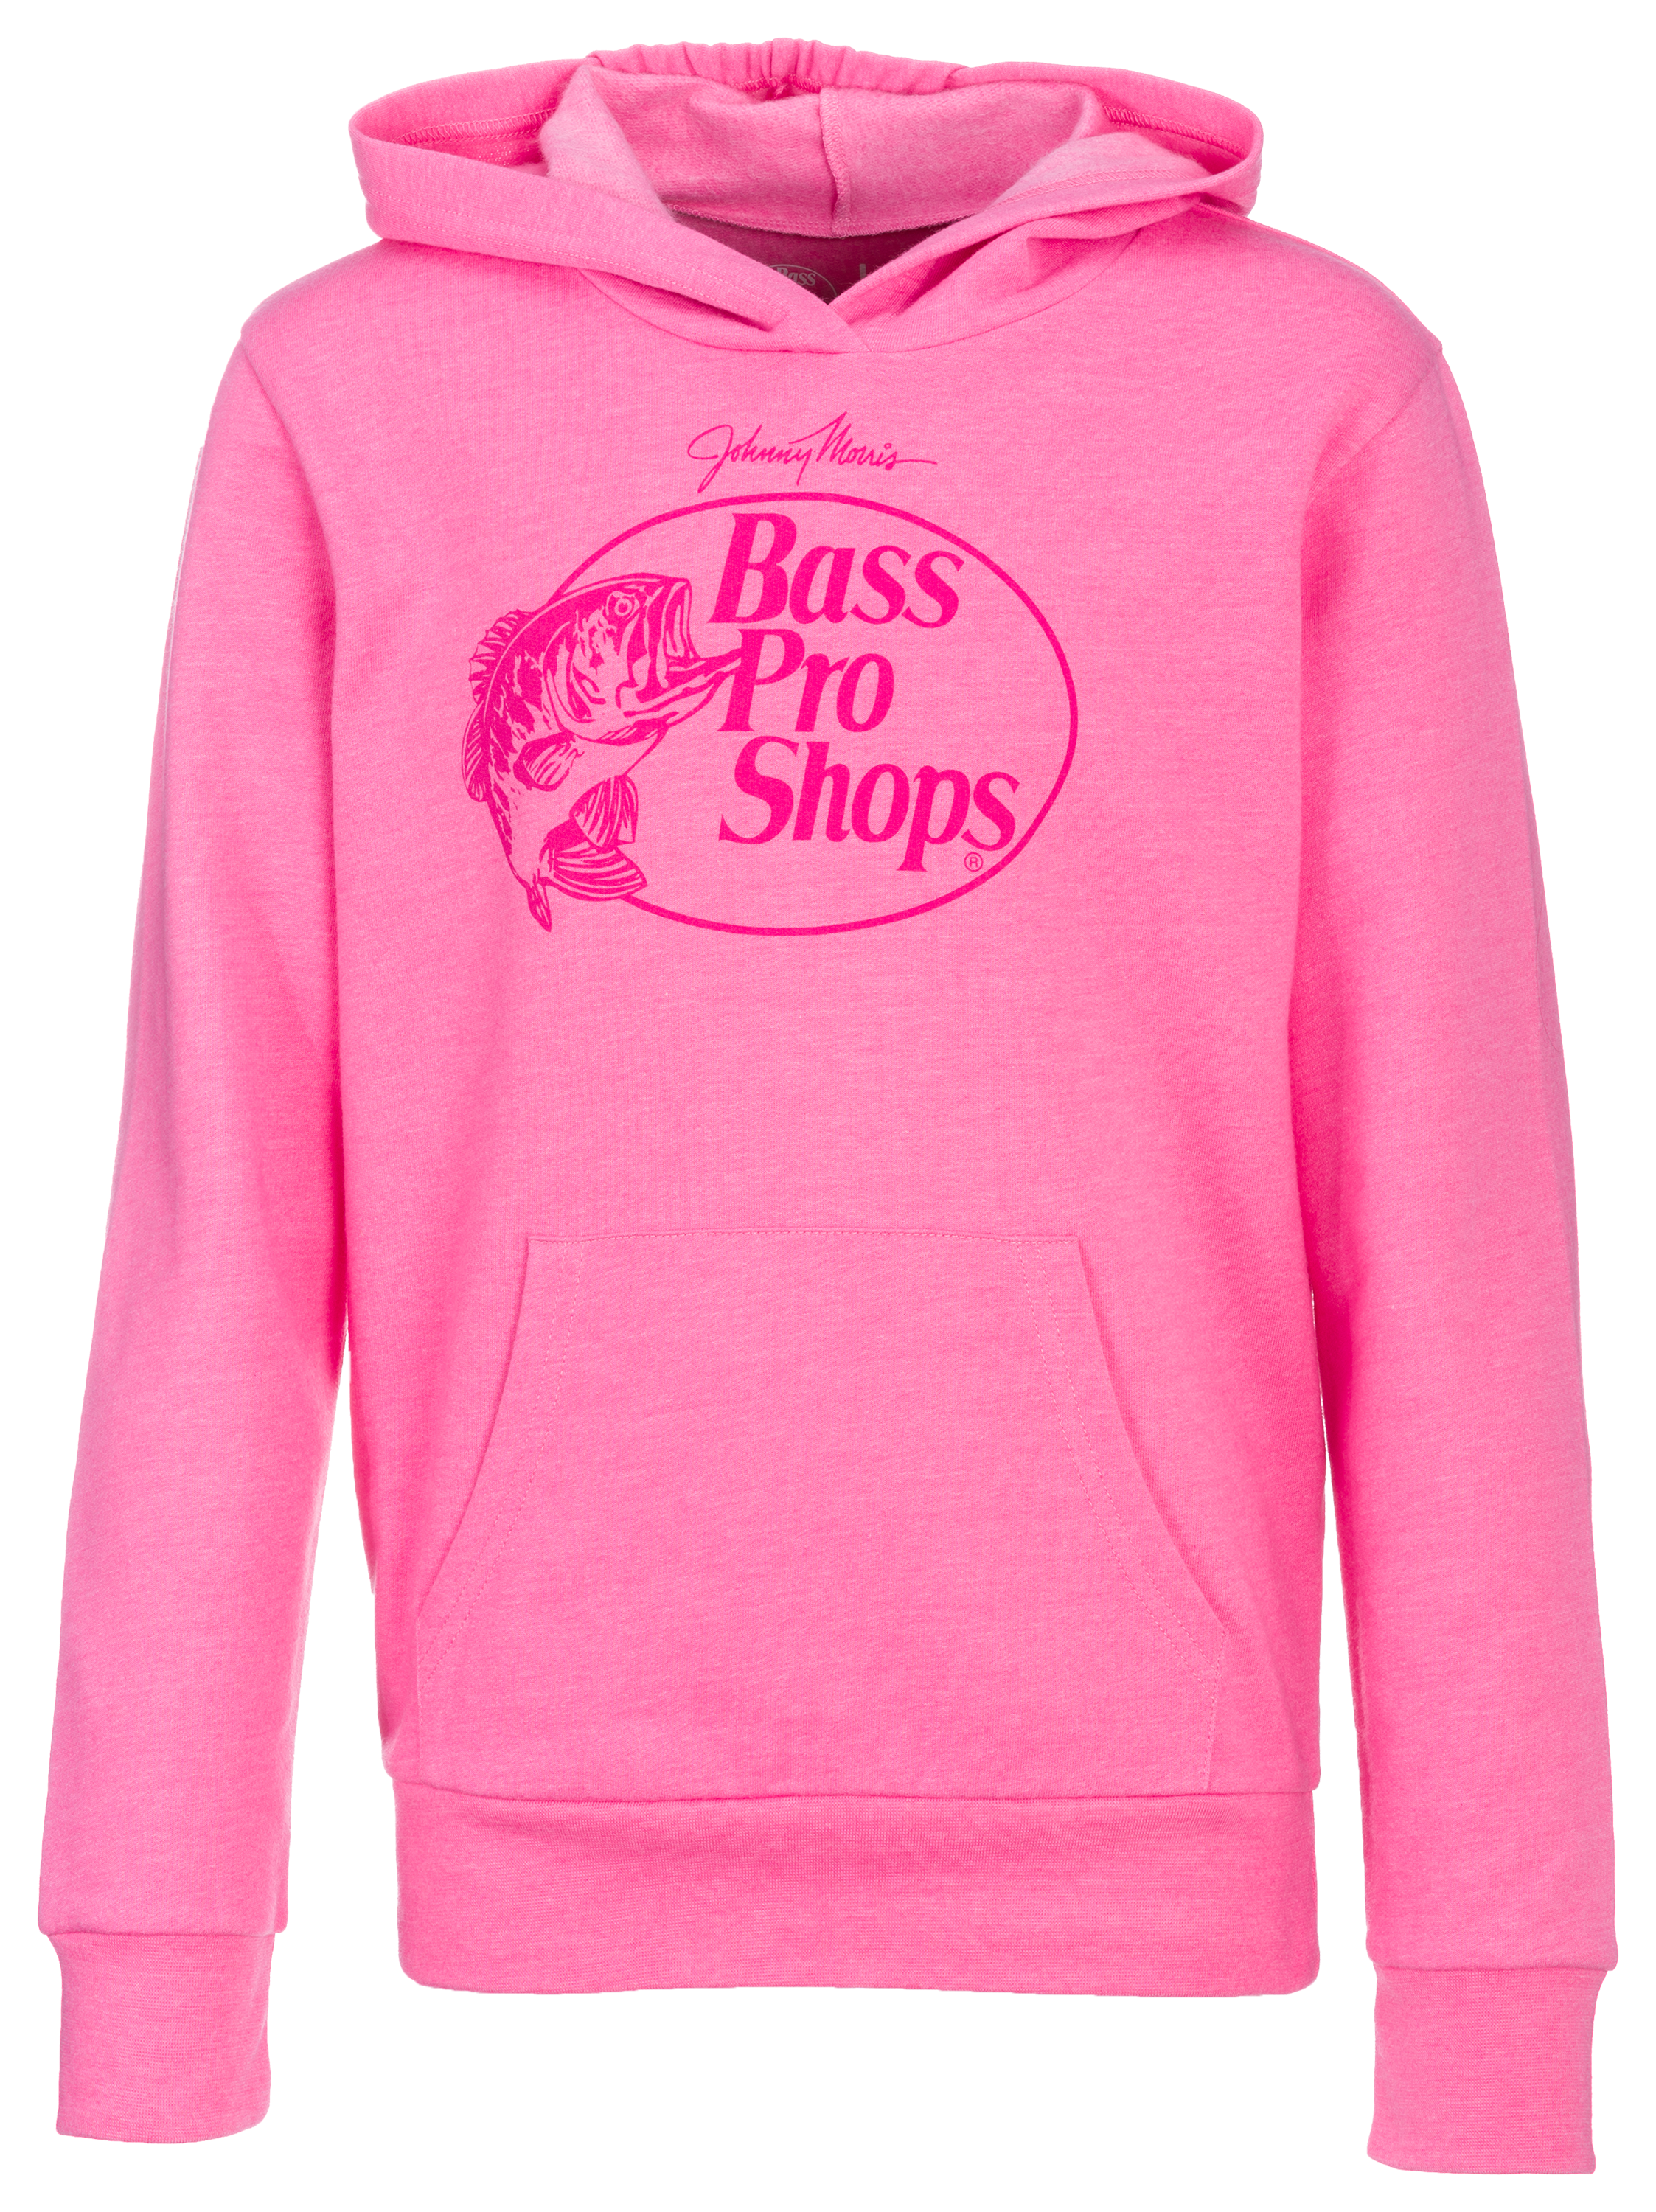 Bass Pro Shops Fleece Logo Hoodie for Toddlers or Girls